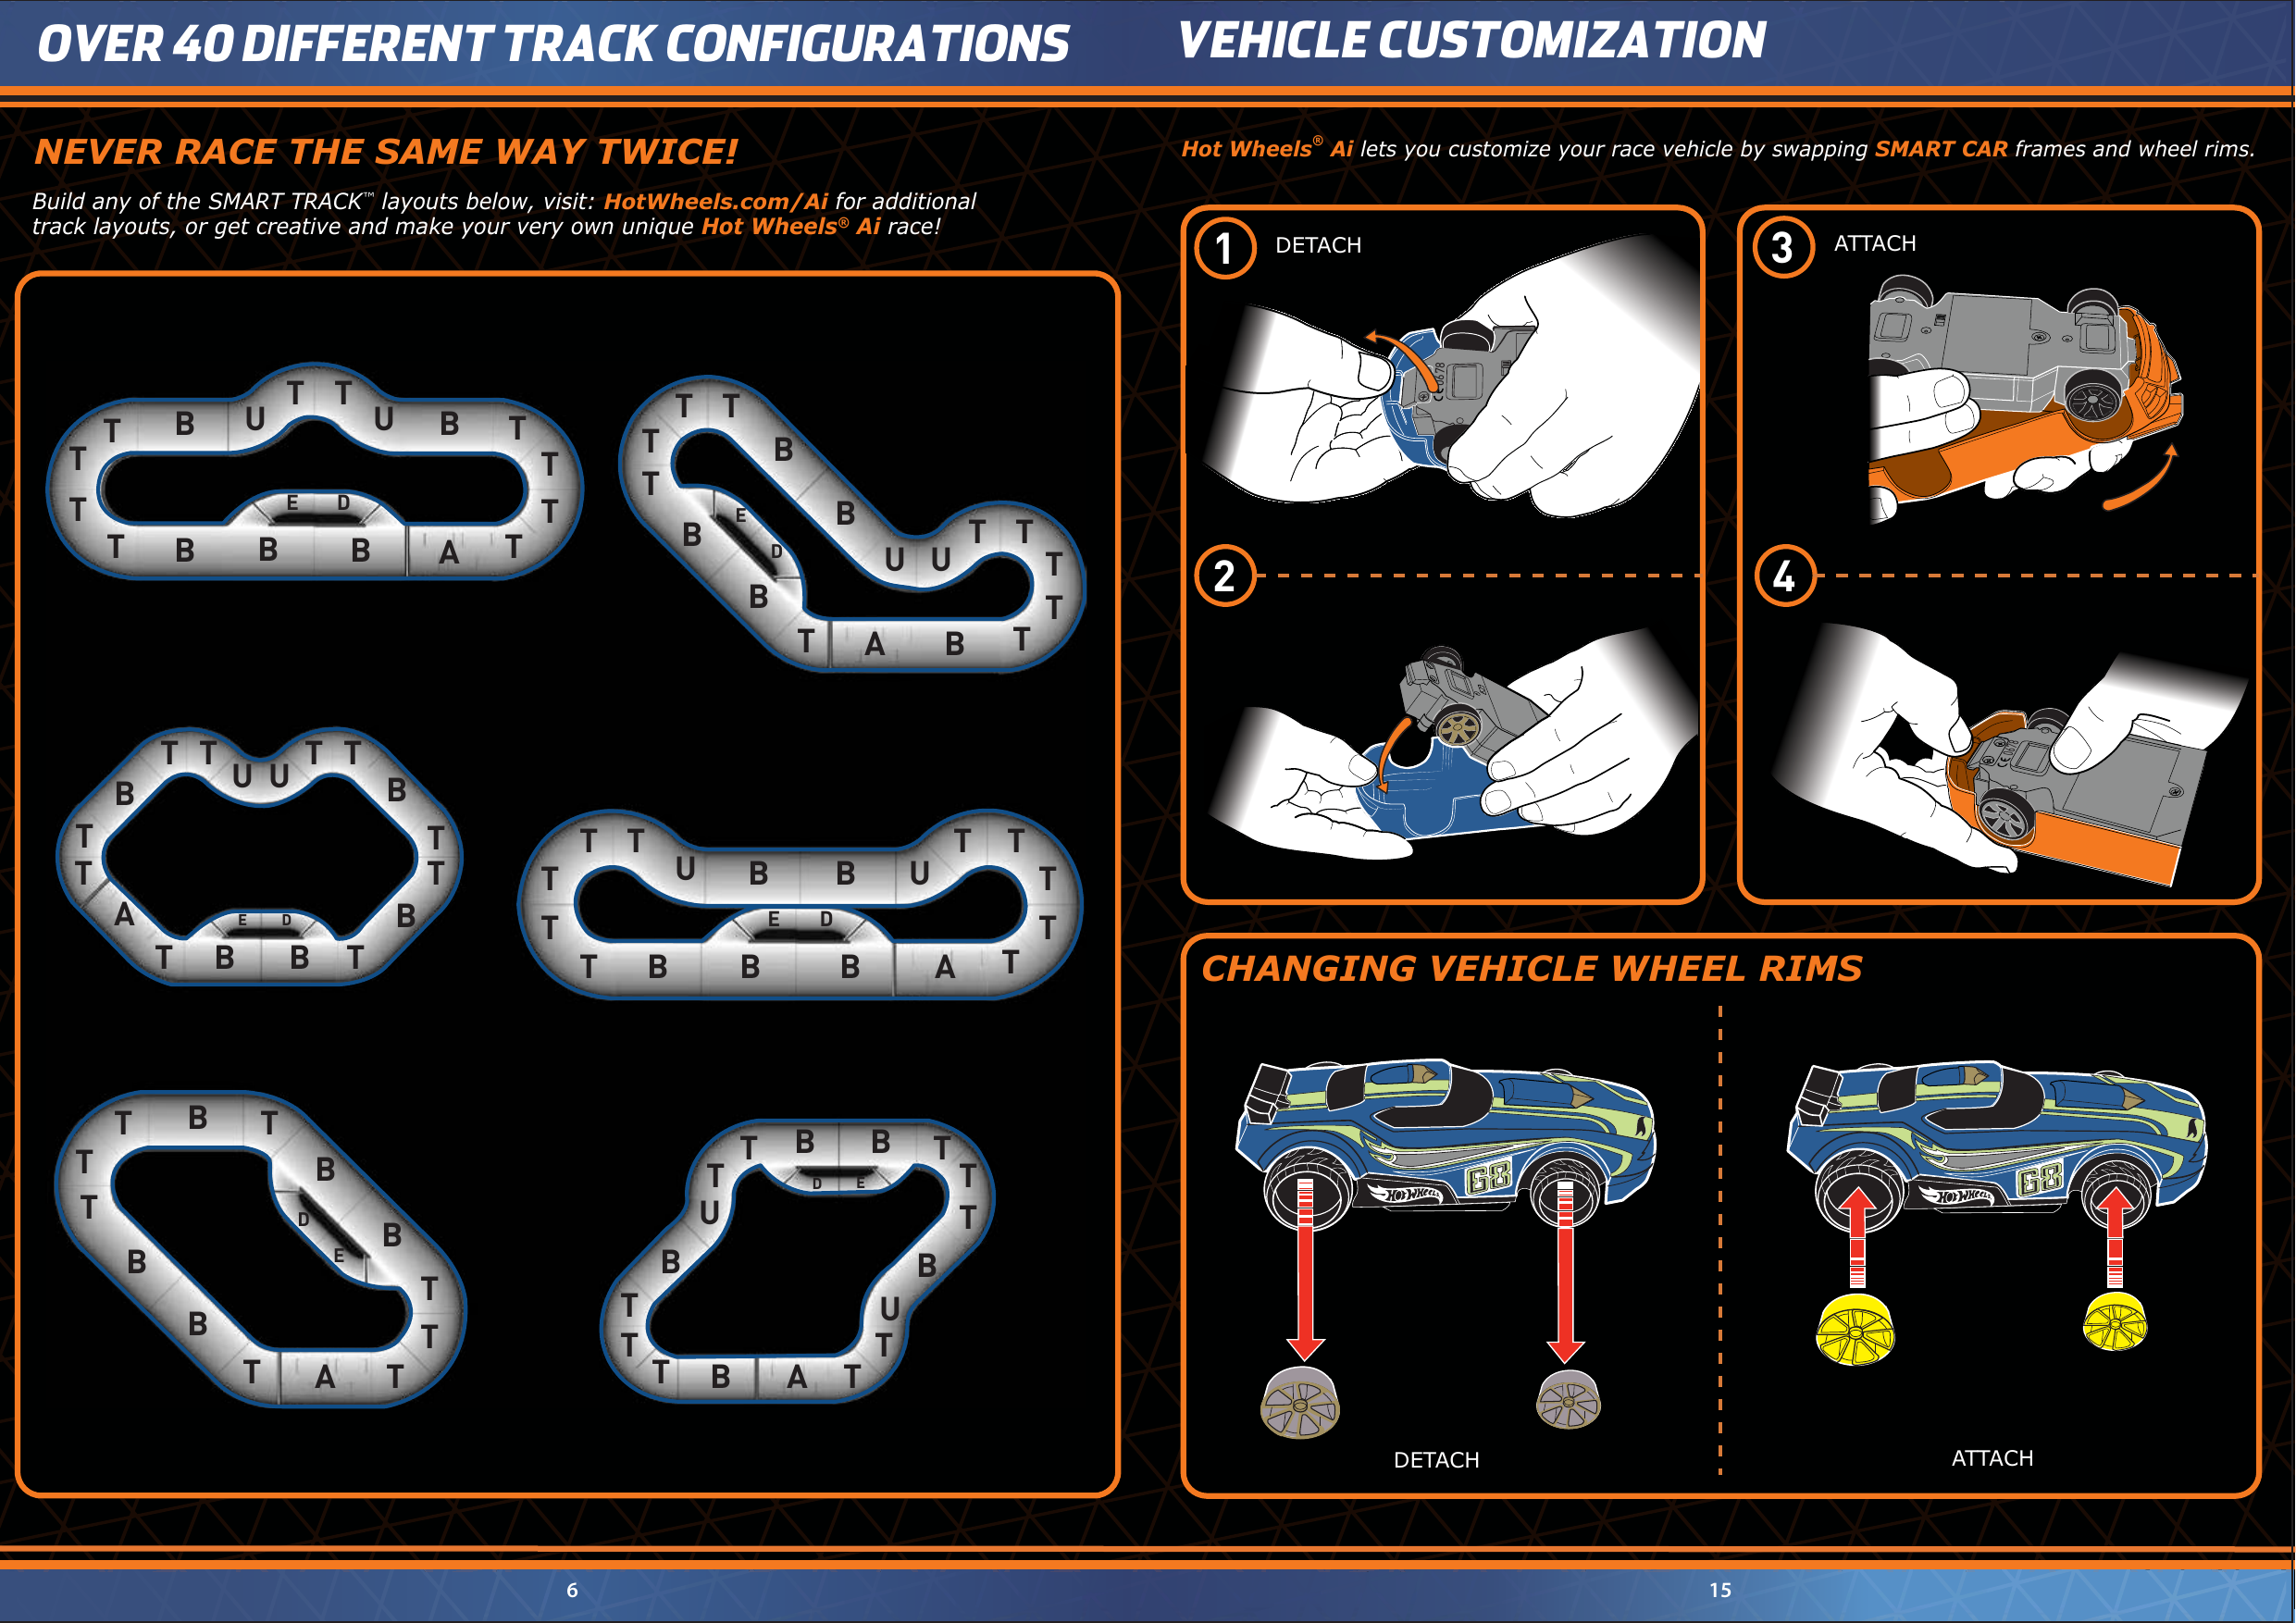 DETACH ATTACHDETACH ATTACHVEHICLE CUSTOMIZATION6 15OVER 40 DIFFERENT TRACK CONFIGURATIONSHot Wheels® Ai lets you customize your race vehicle by swapping SMART CAR frames and wheel rims.CHANGING VEHICLE WHEEL RIMSBuild any of the SMART TRACK™ layouts below, visit: HotWheels.com/Ai for additionaltrack layouts, or get creative and make your very own unique Hot Wheels® Ai race!U UU UU UUUUUT TTTT TTTTTTTBBBBBBBBBBBBBBBBBBTTTT TTTTTTTTTTTTTTTTTTTTTTTTTTTTTTT TTTTTTTTTTTBBBBBBBBBBBBDAAAAAAEDE DEDEEDNEVER RACE THE SAME WAY TWICE!06780678ED1 2 3 4 